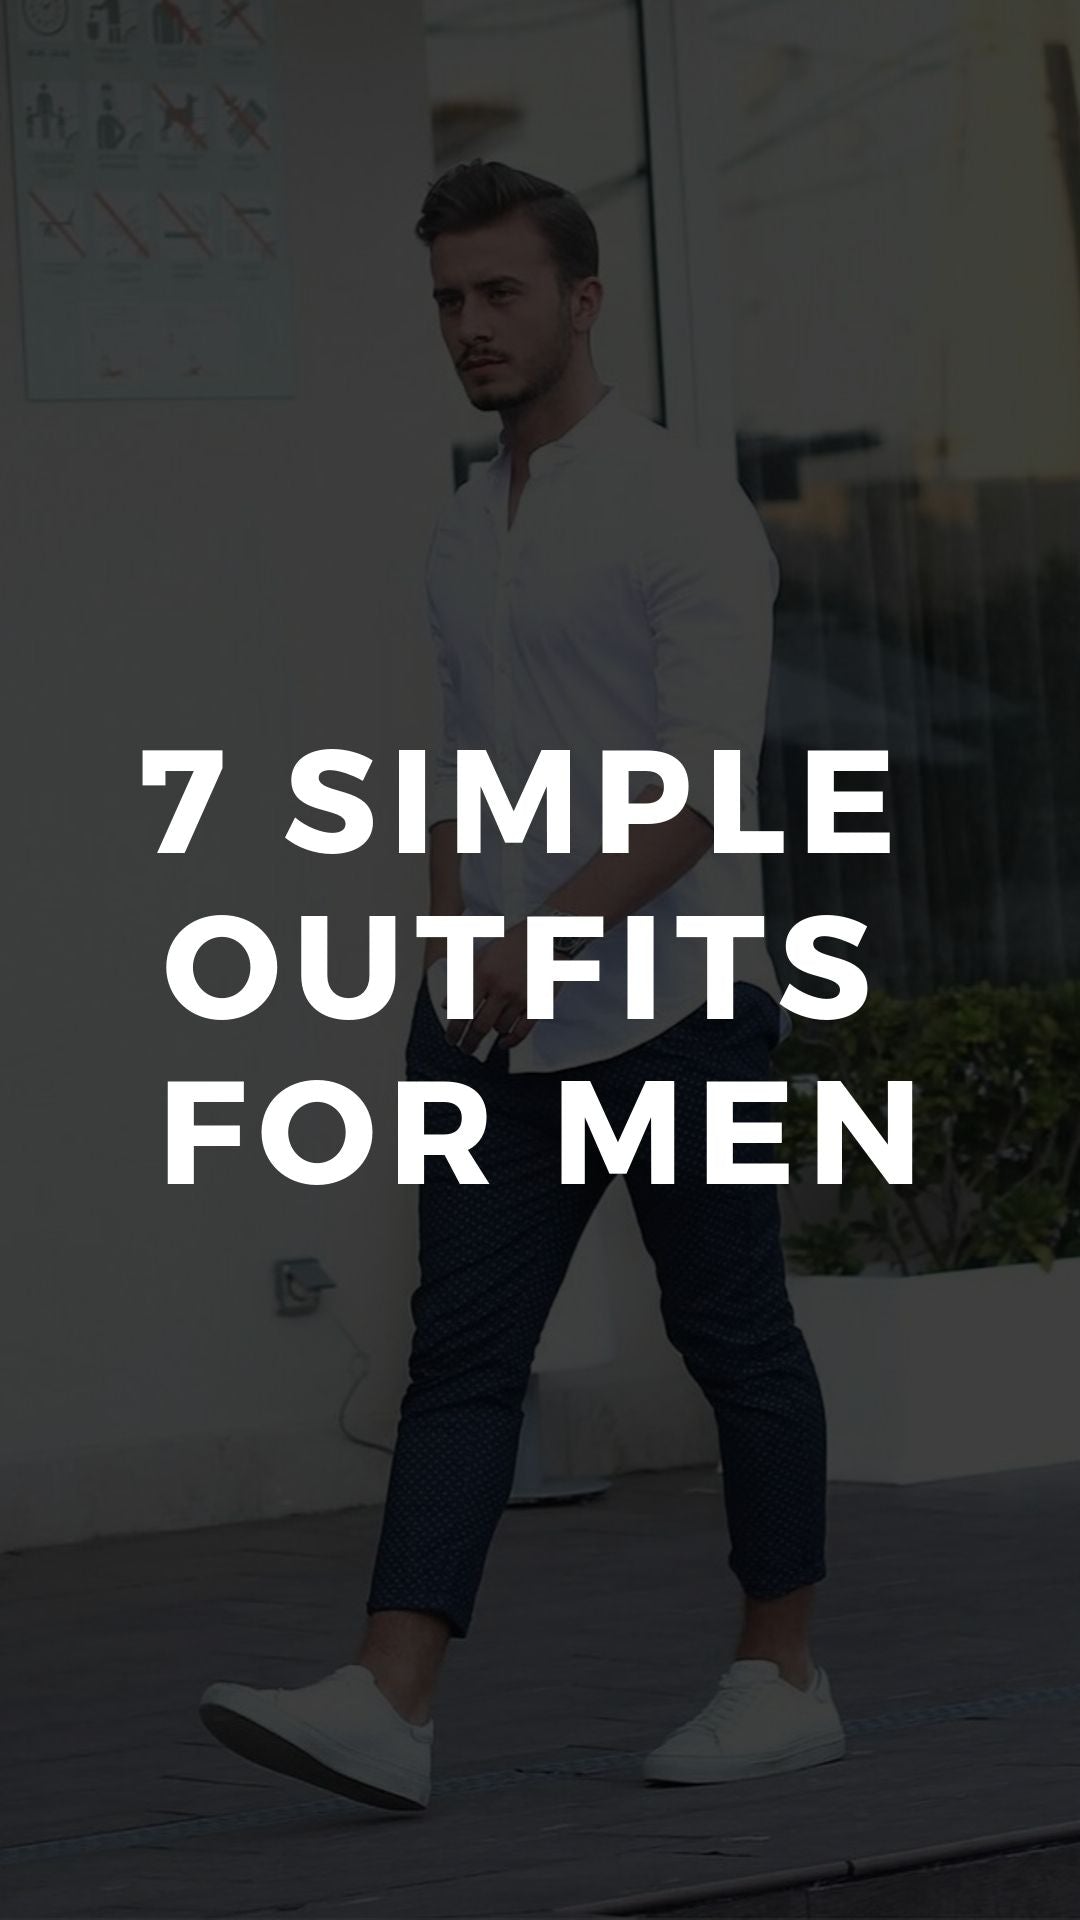 7 SIMPLE  OUTFITS  FOR MEN